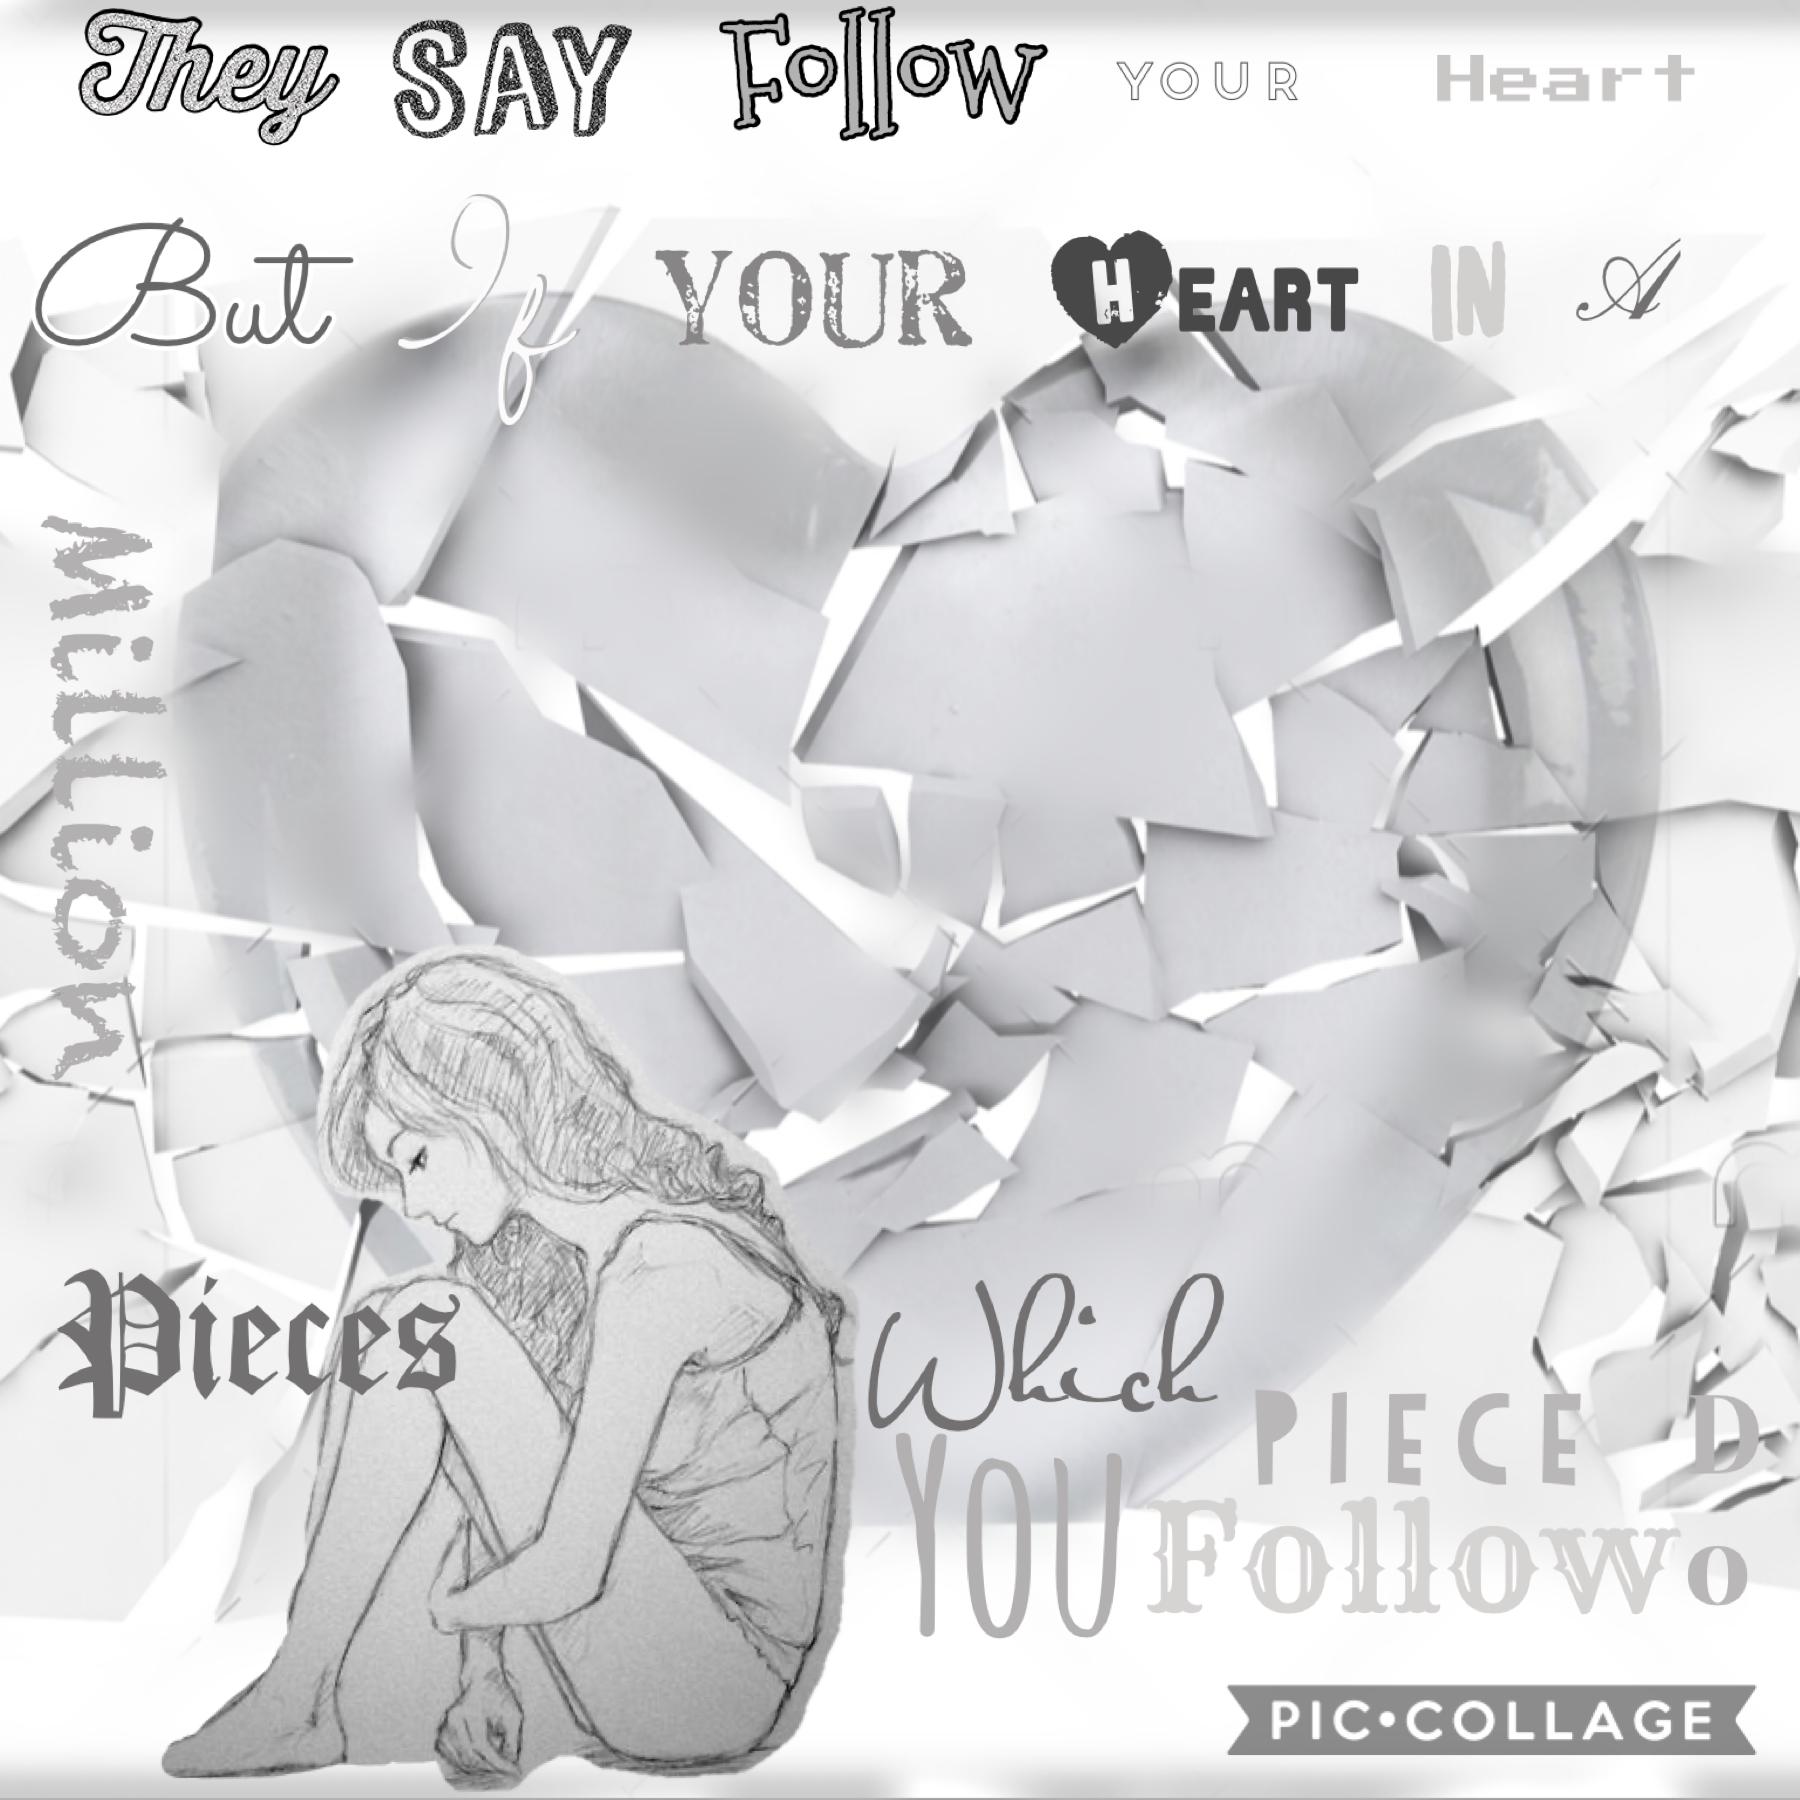 They say follow your heart